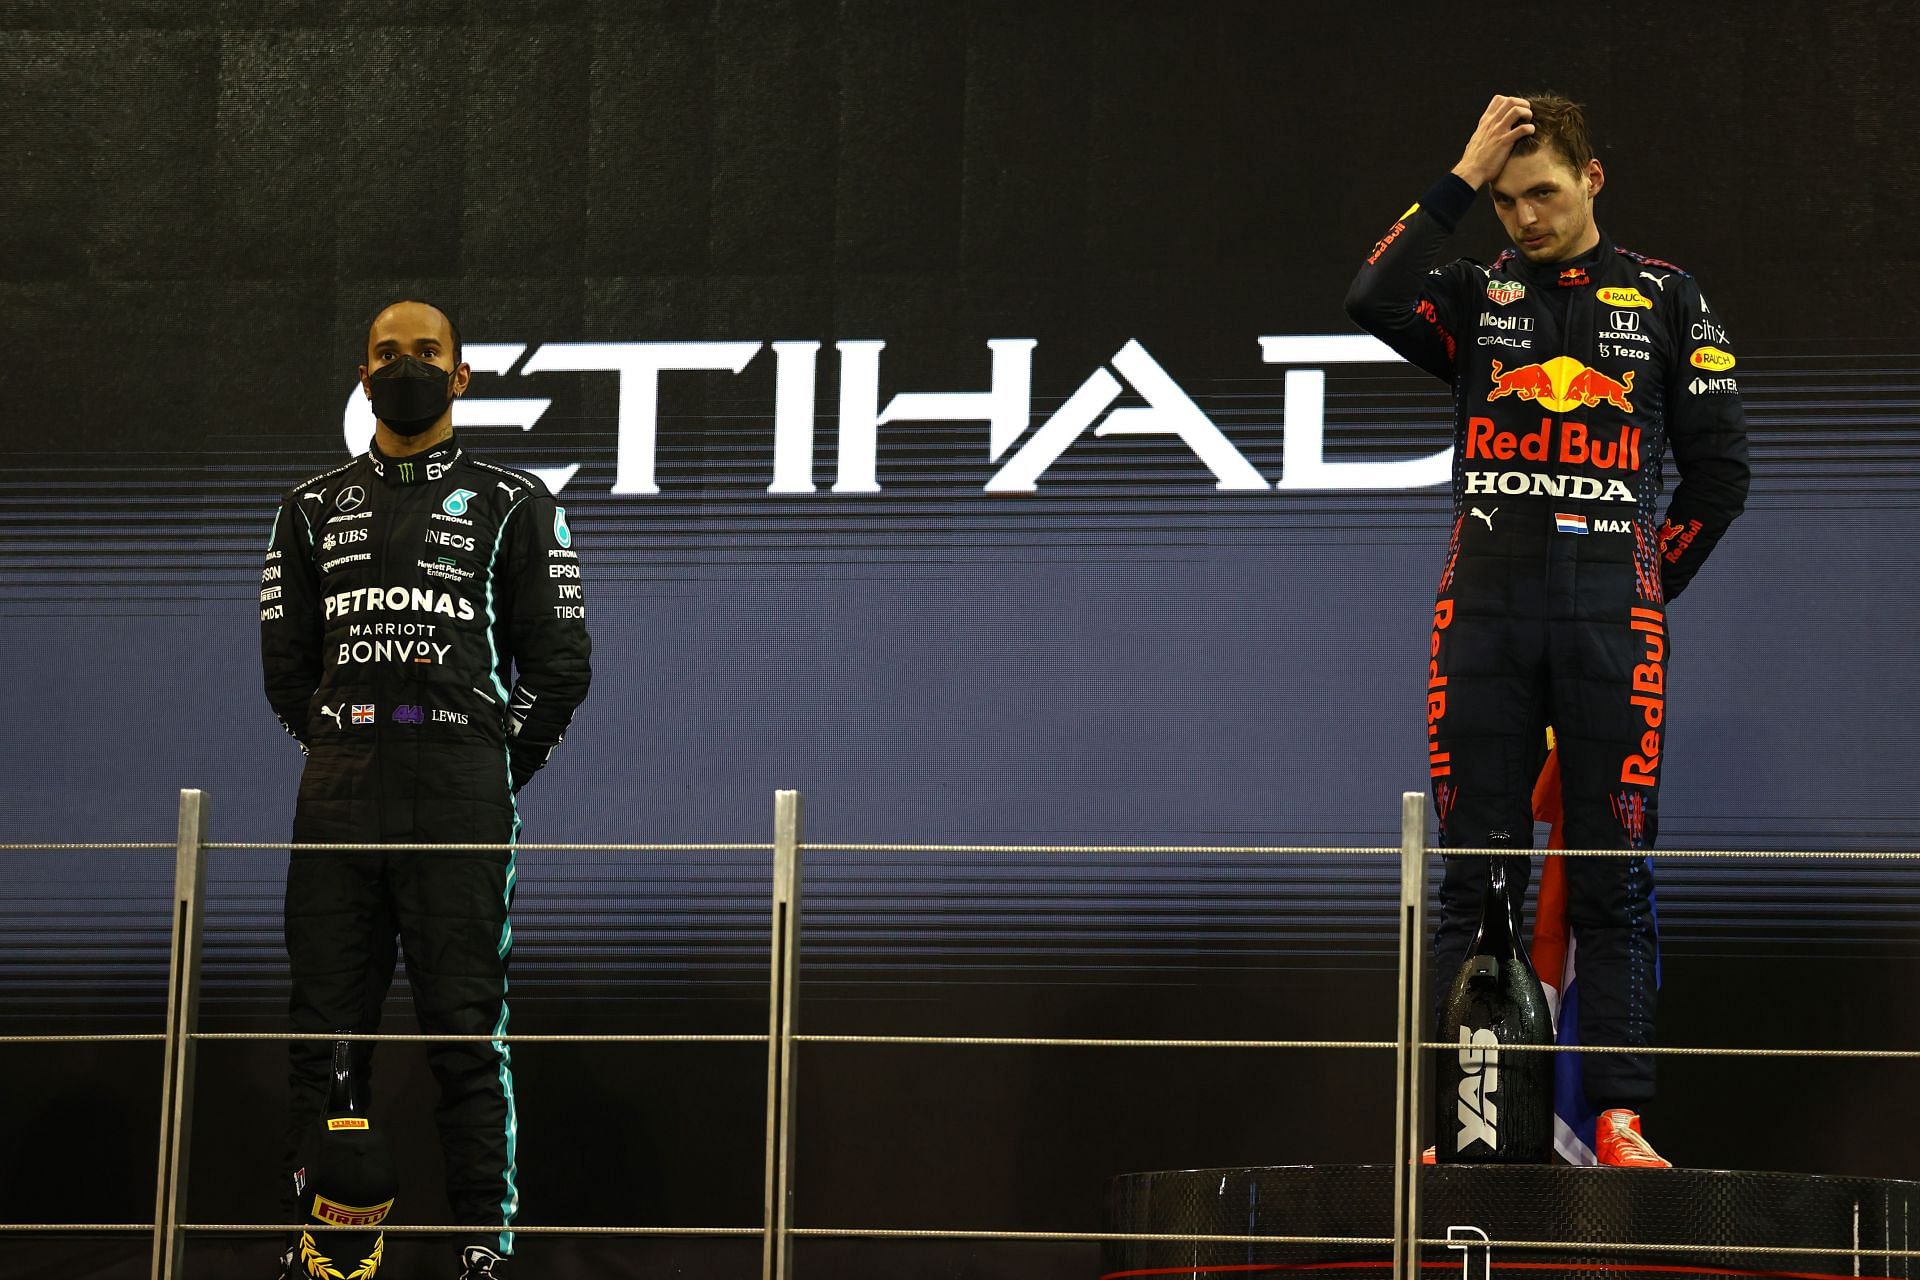 Lewis Hamilton (left) and Max Verstappen (right) on the podium of the 2021 Abu Dhabi Grand Prix (Photo by Bryn Lennon/Getty Images)